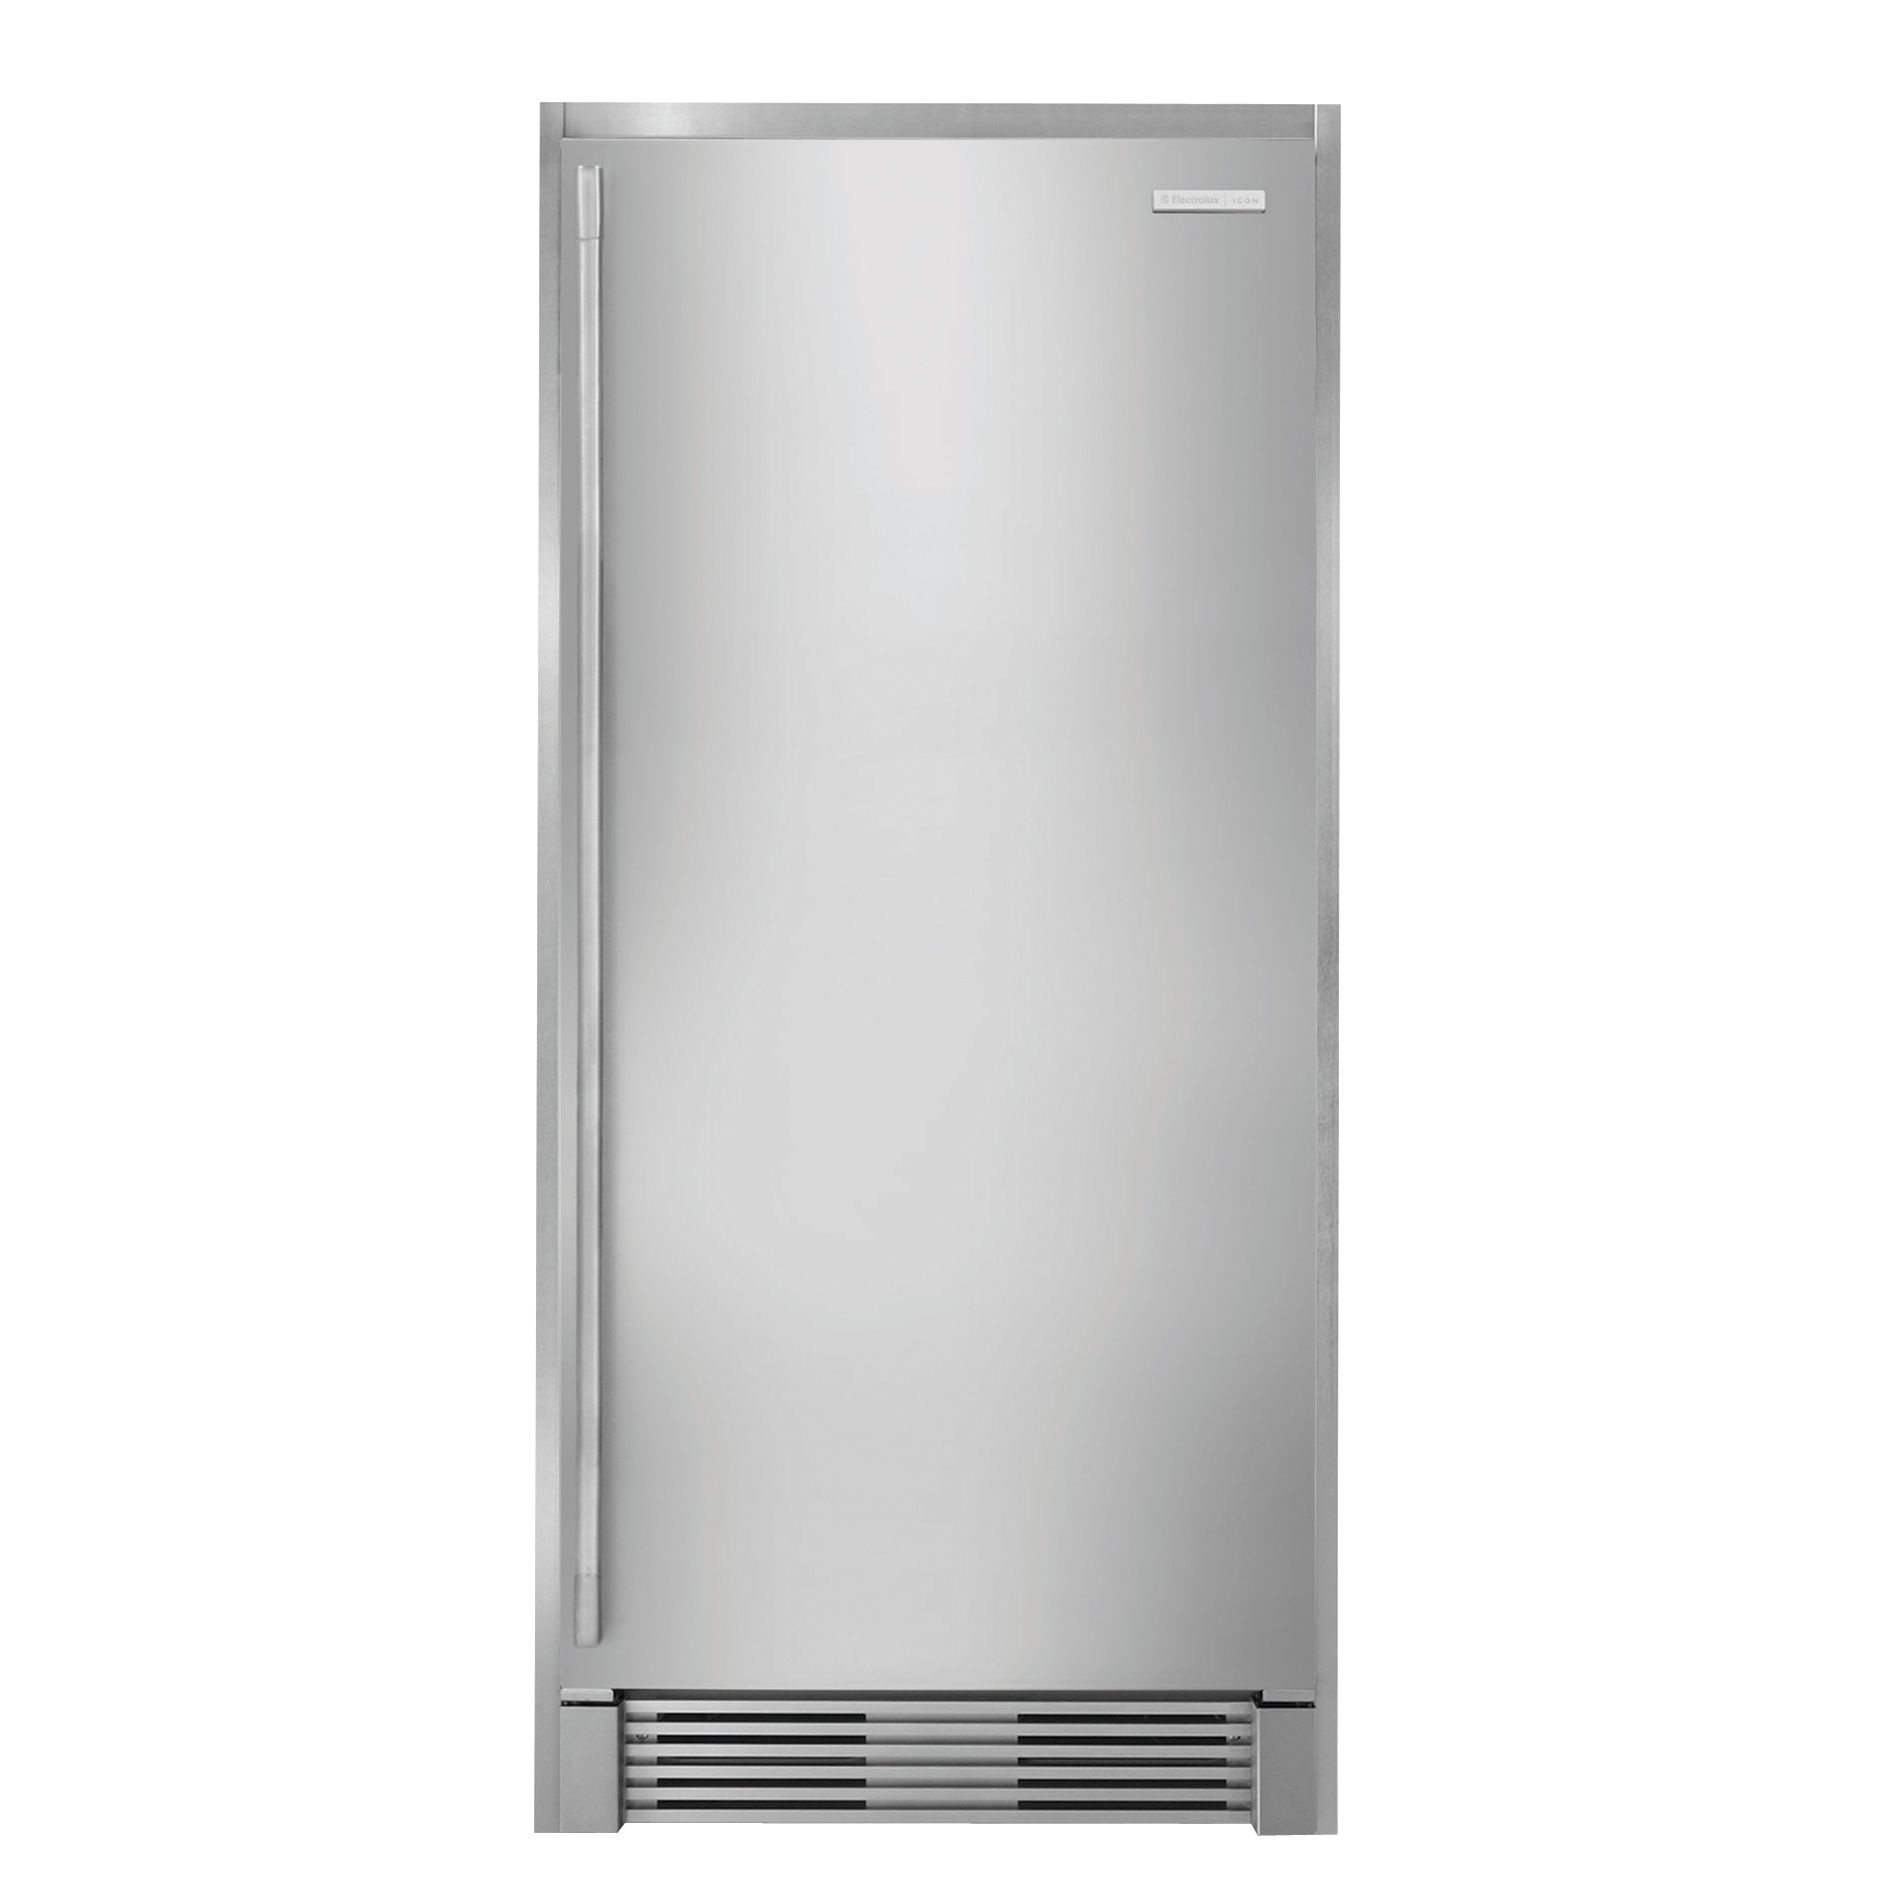 Electrolux ICON 19.0 cu. ft. Built-in All Refrigerator - Stainless Steel